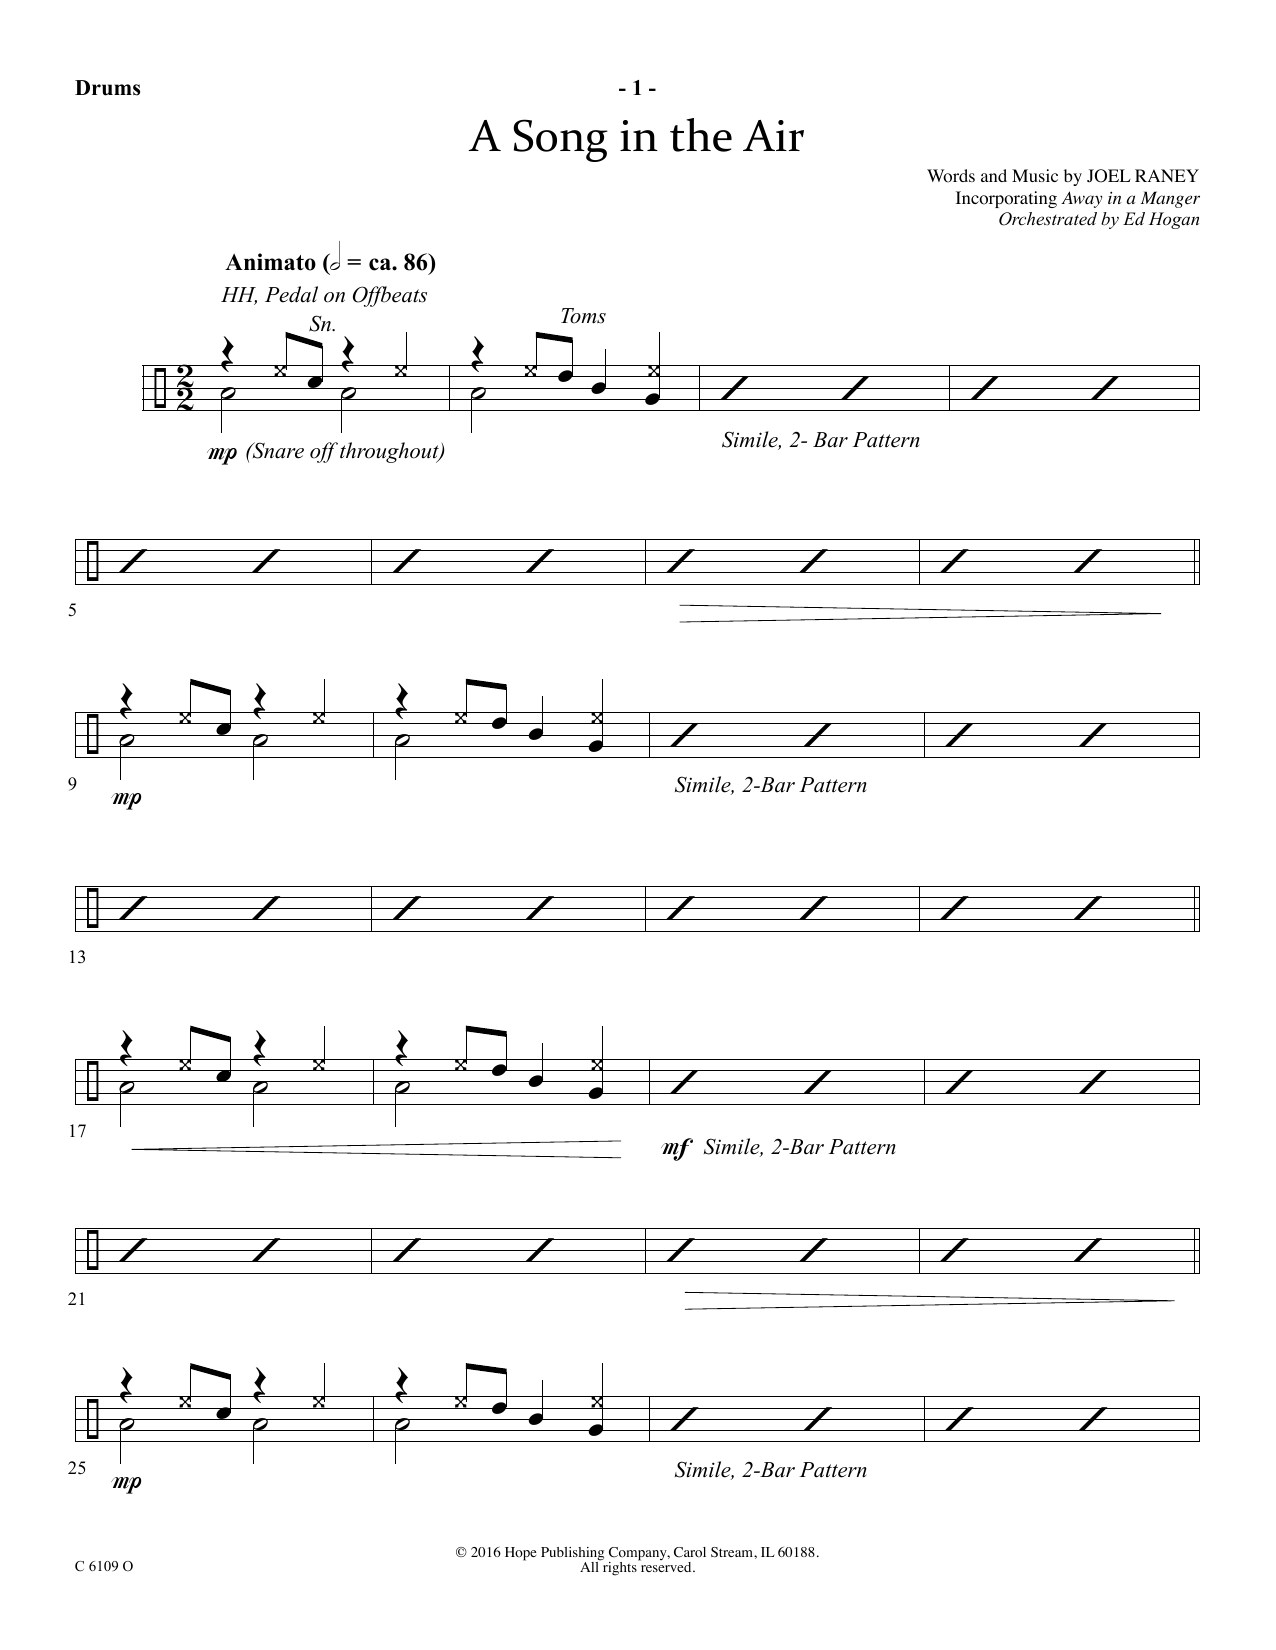 Download Ed Hogan A Song In The Air - Drums Sheet Music